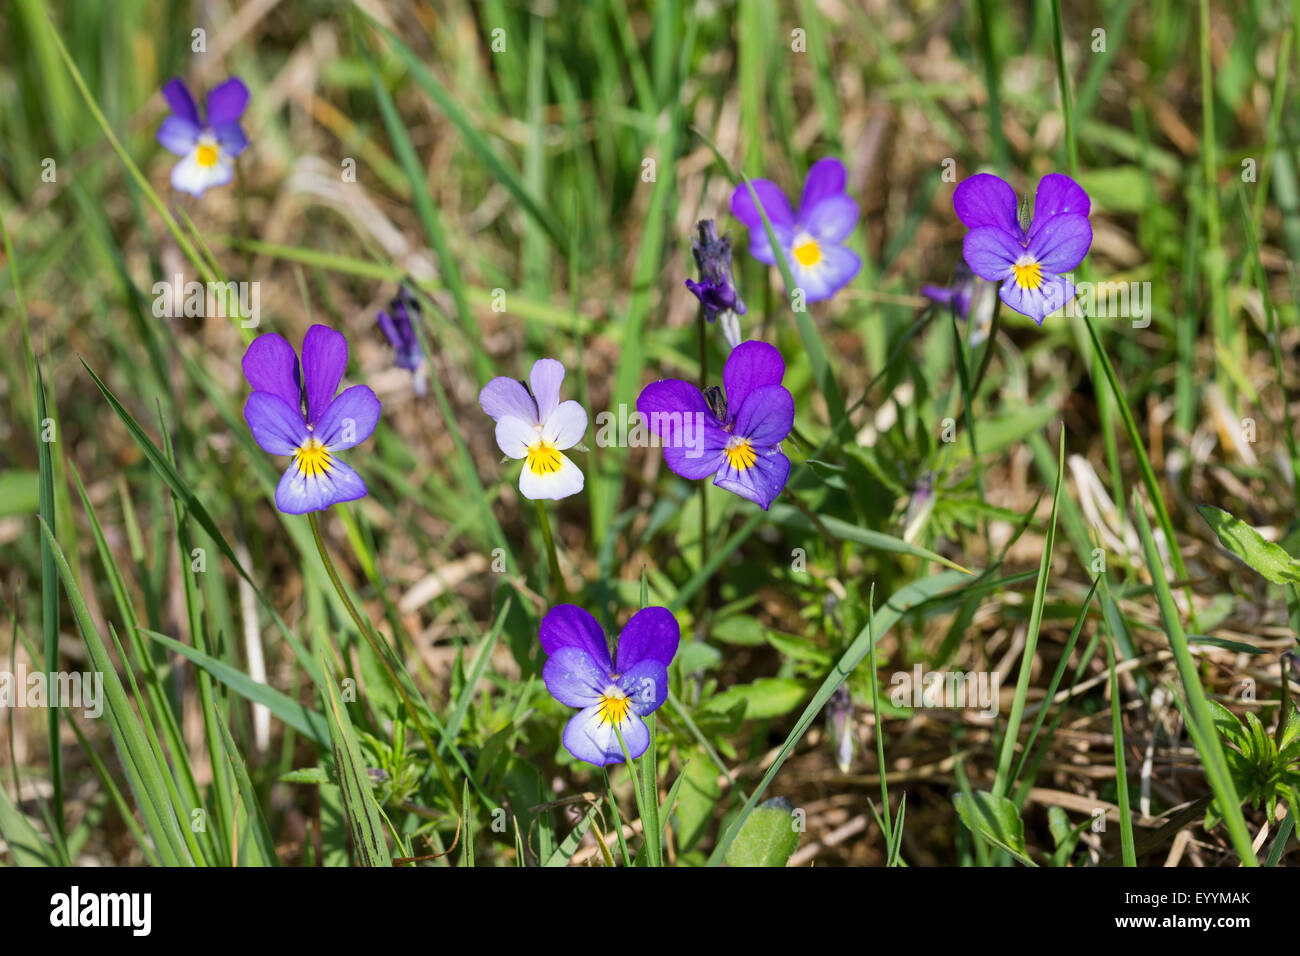 Heartsease, Heart's ease, Heart's delight, Tickle-my-fancy, Wild pansy, Jack-jump-up-and-kiss-me, Come-and-cuddle-me, Three faces in a hood, Love-in-idleness (Viola tricolor), blooming, Germany Stock Photo